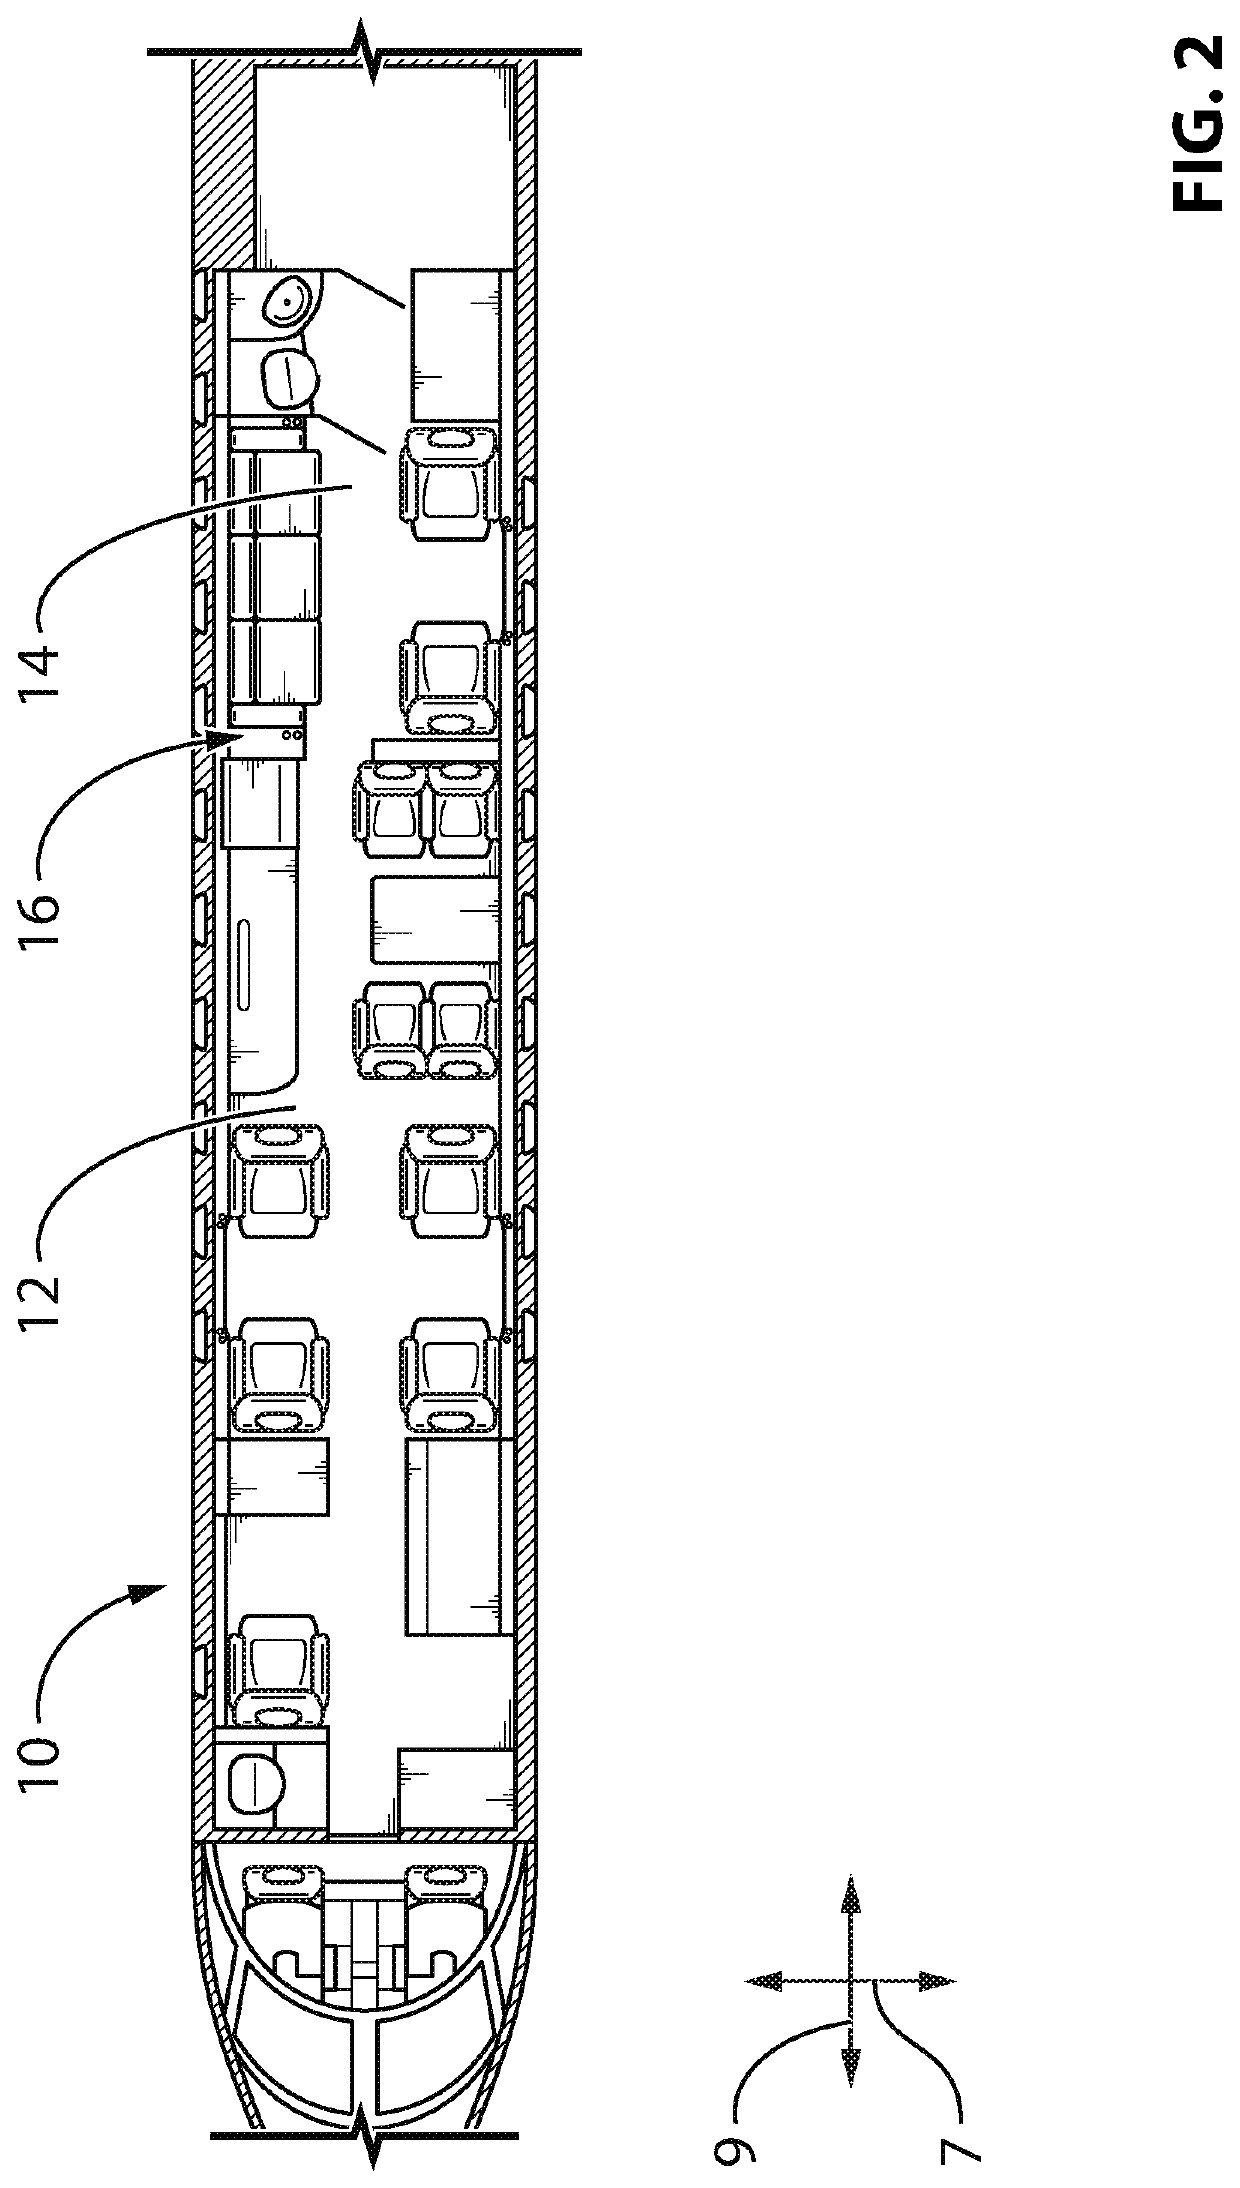 Aircraft cabin and partition assembly therefor